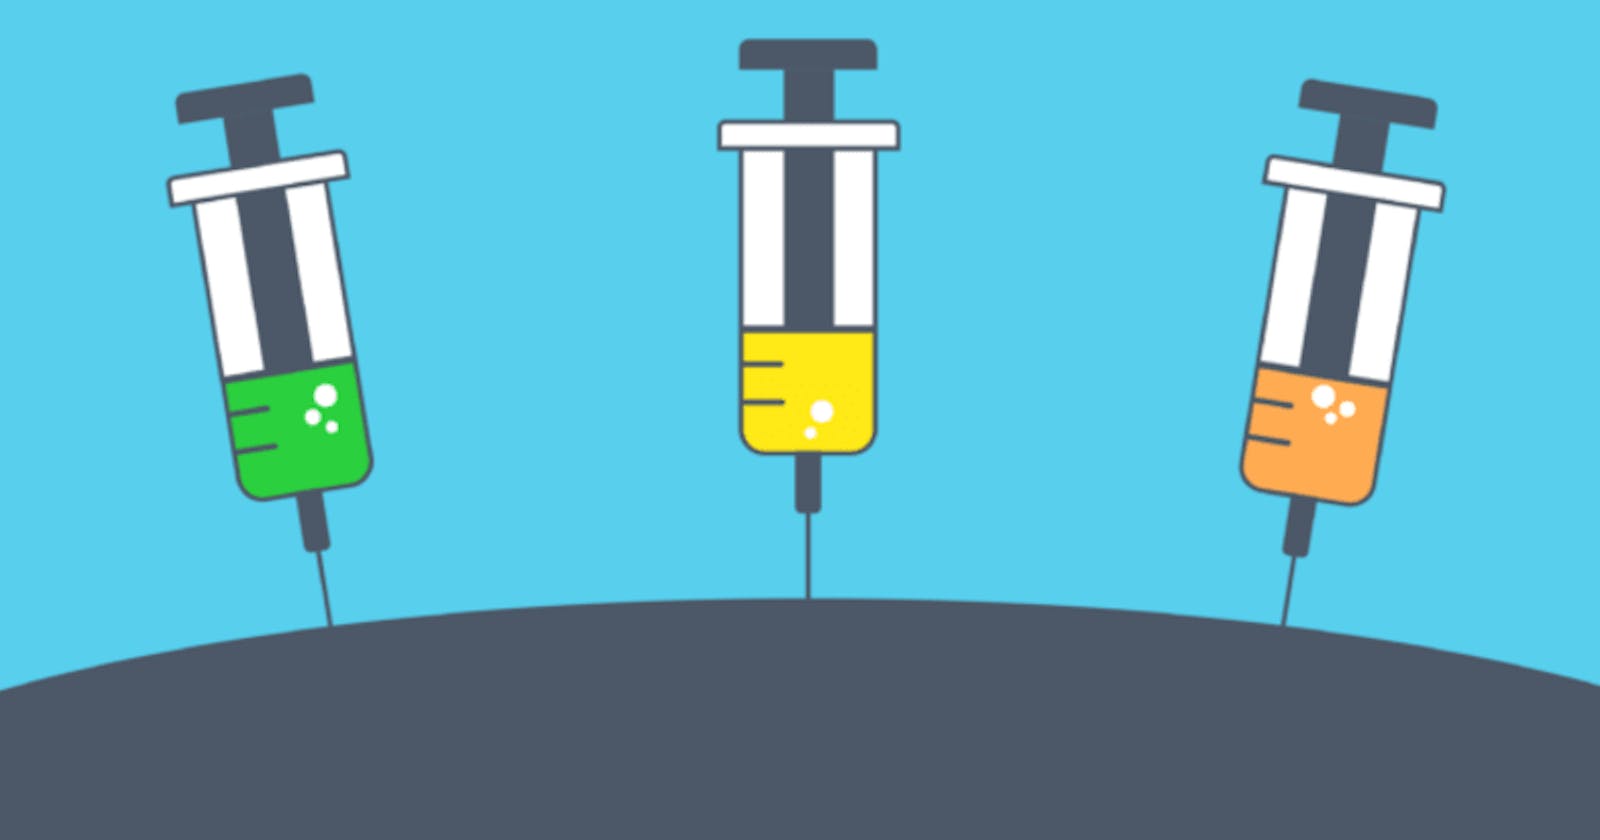 Why do I have to use Dependency Injection in JS?